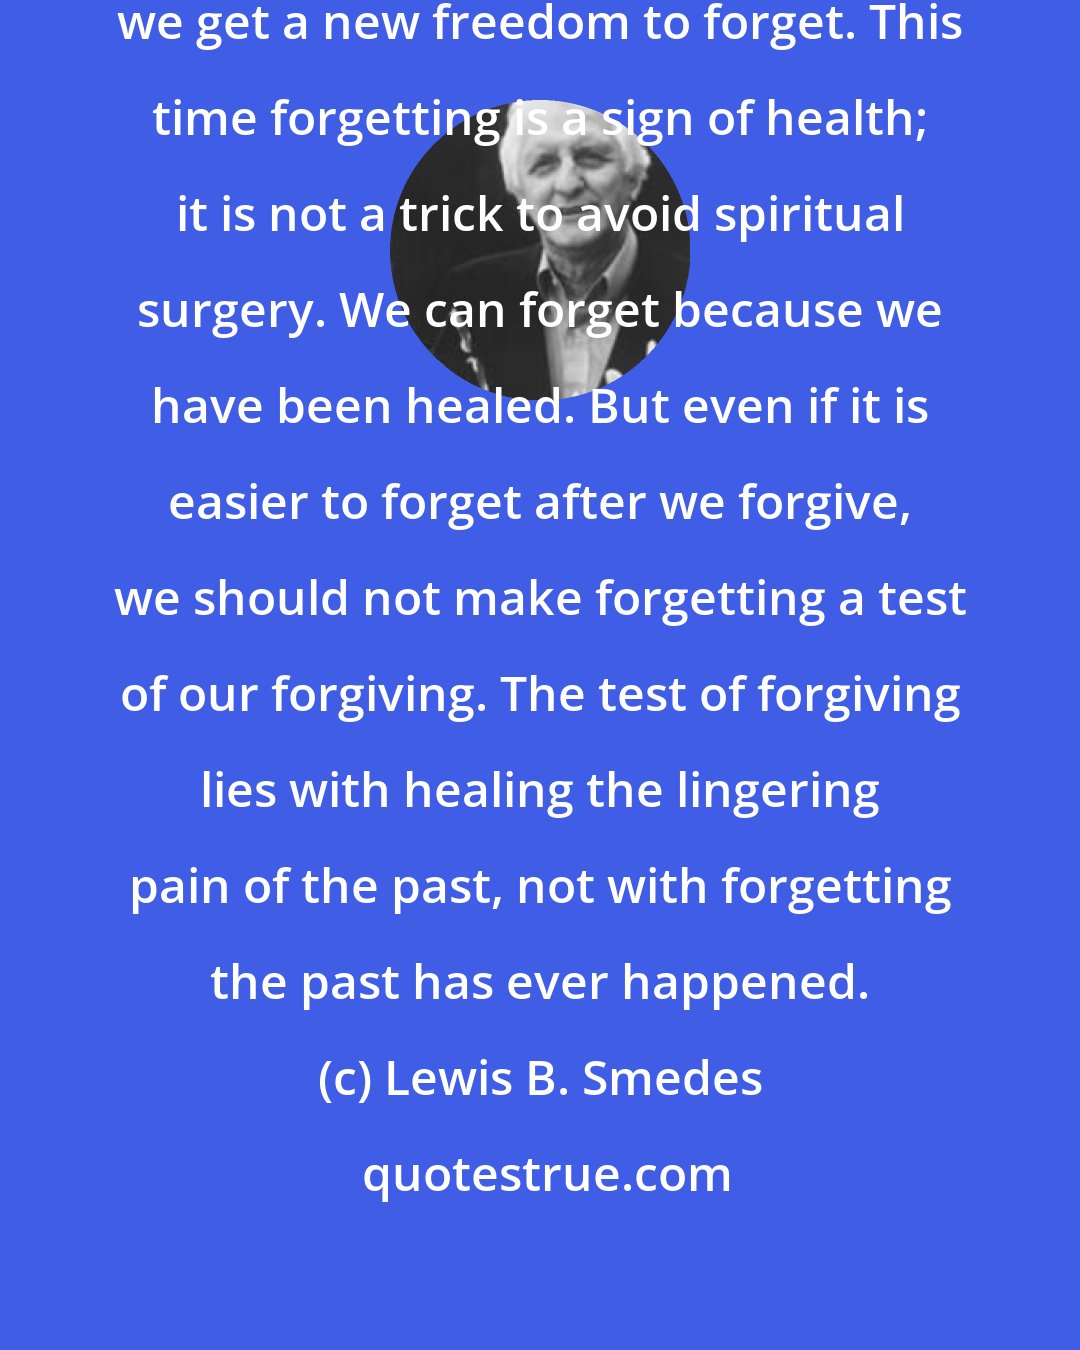 Lewis B. Smedes: Once we have forgiven, however, we get a new freedom to forget. This time forgetting is a sign of health; it is not a trick to avoid spiritual surgery. We can forget because we have been healed. But even if it is easier to forget after we forgive, we should not make forgetting a test of our forgiving. The test of forgiving lies with healing the lingering pain of the past, not with forgetting the past has ever happened.